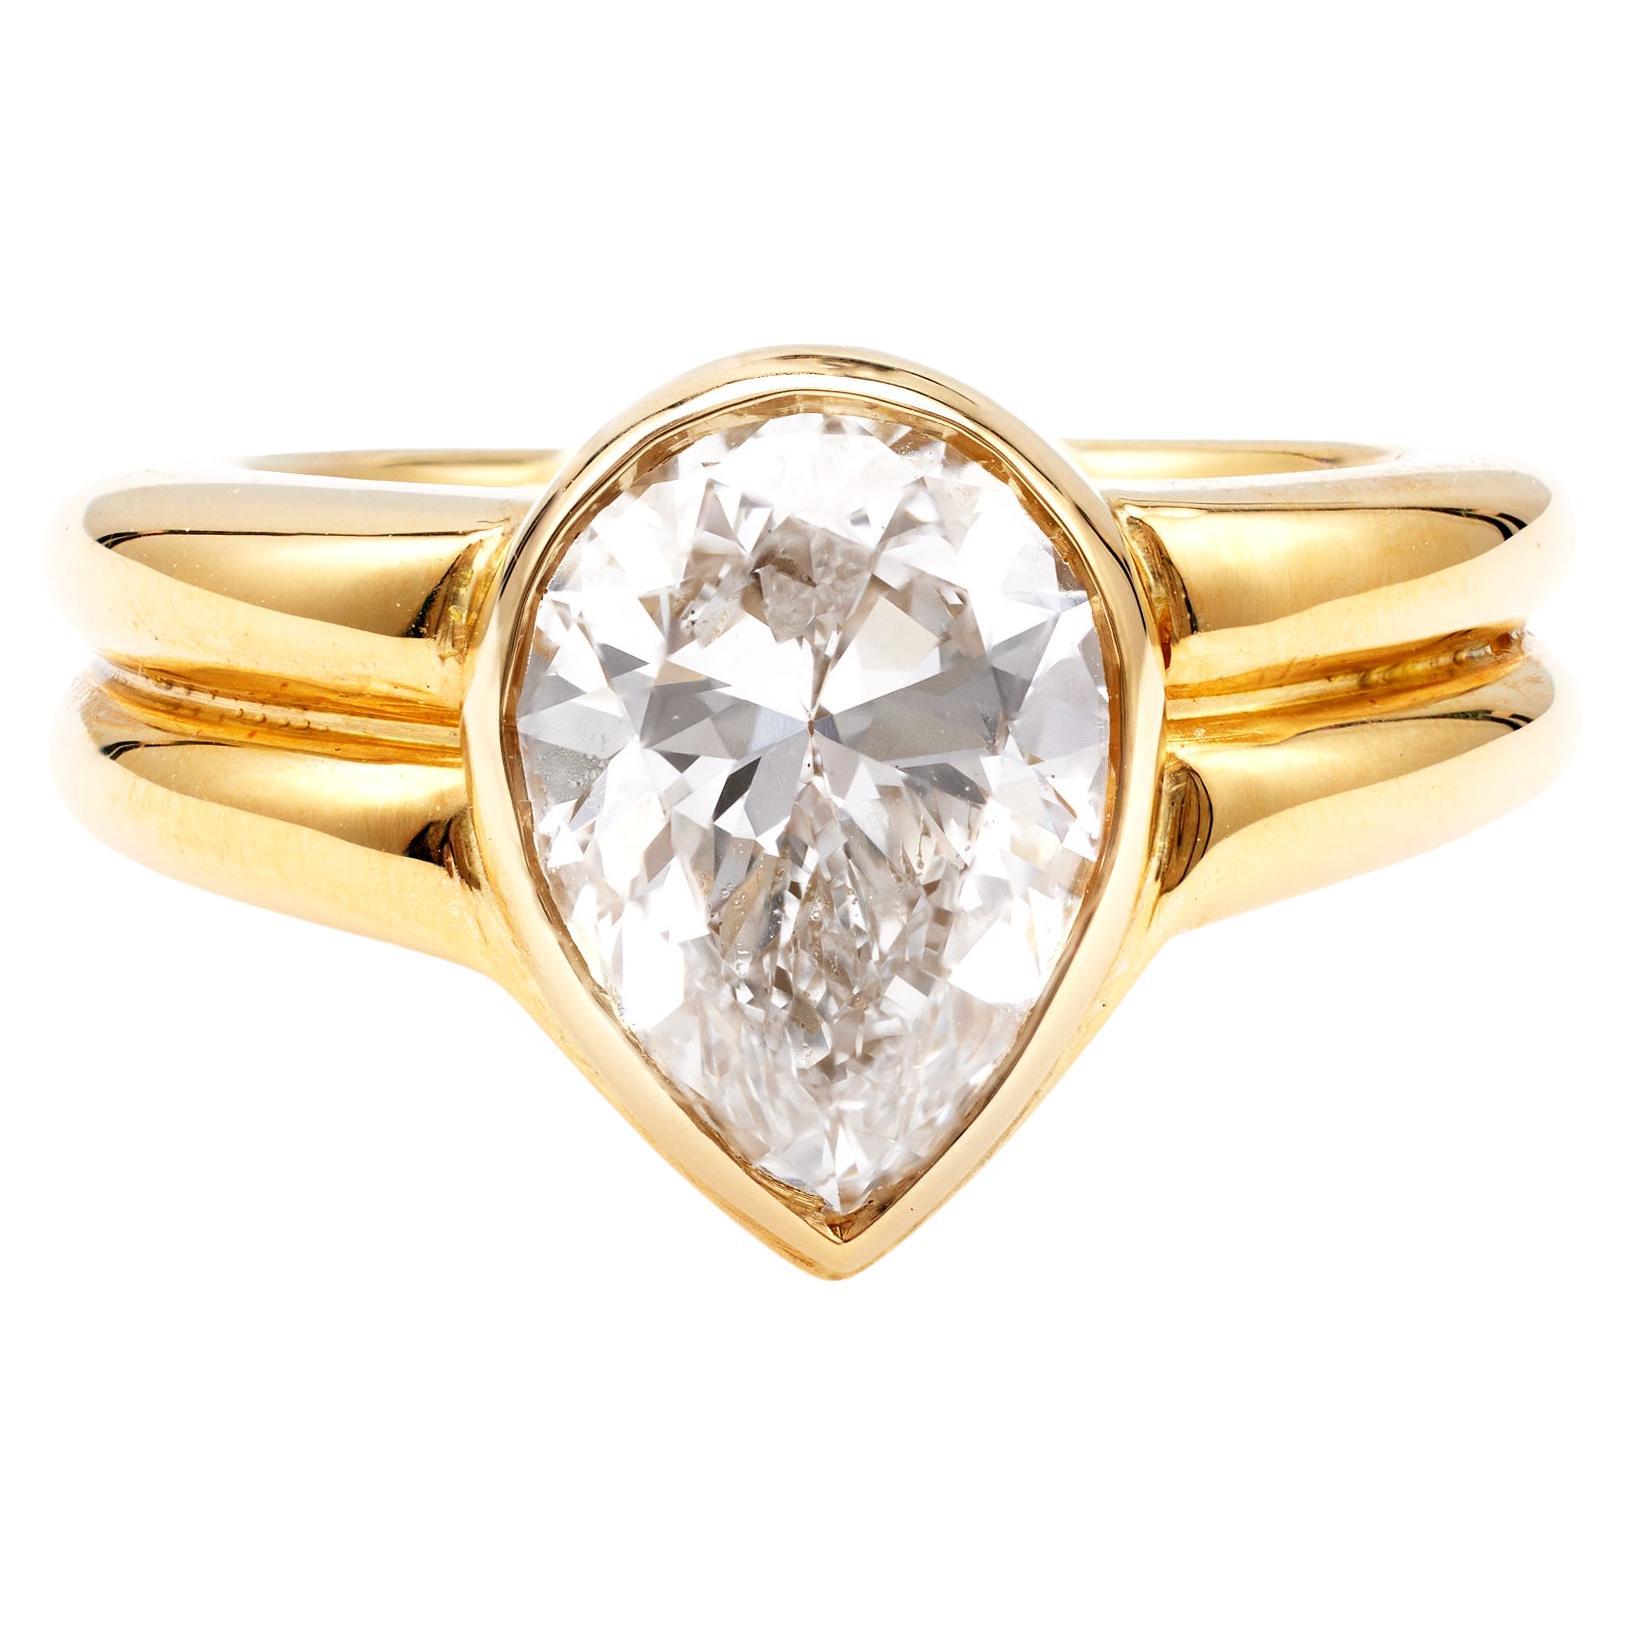 Vintage French GIA 2.85 Carat Pear Cut Diamond 18k Yellow Gold Ring For Sale